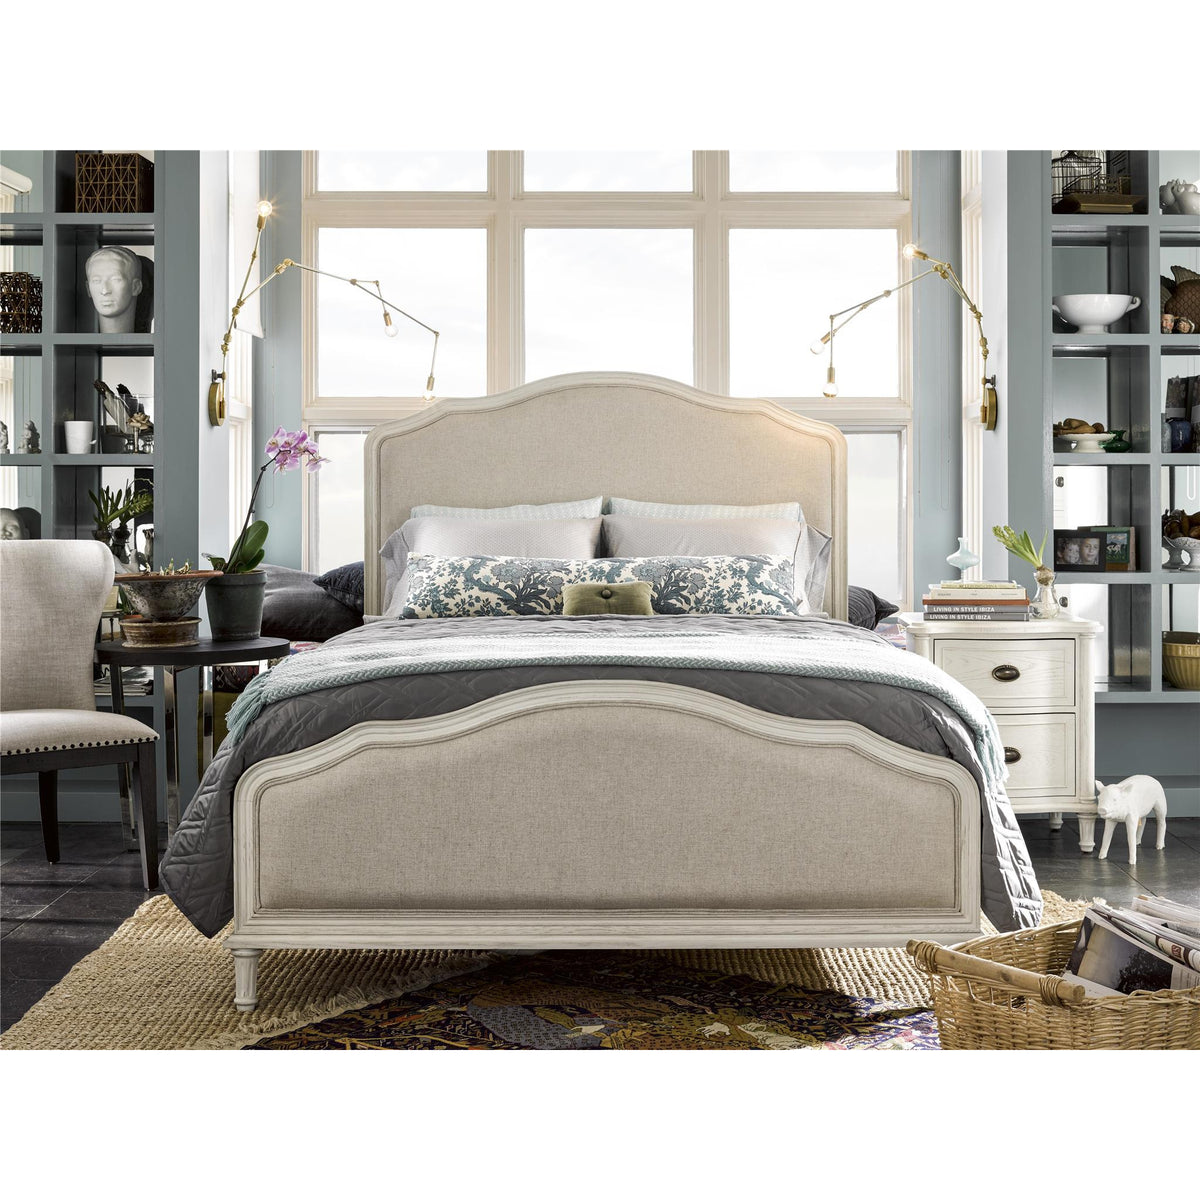 Amity Bed - Be Bold Furniture